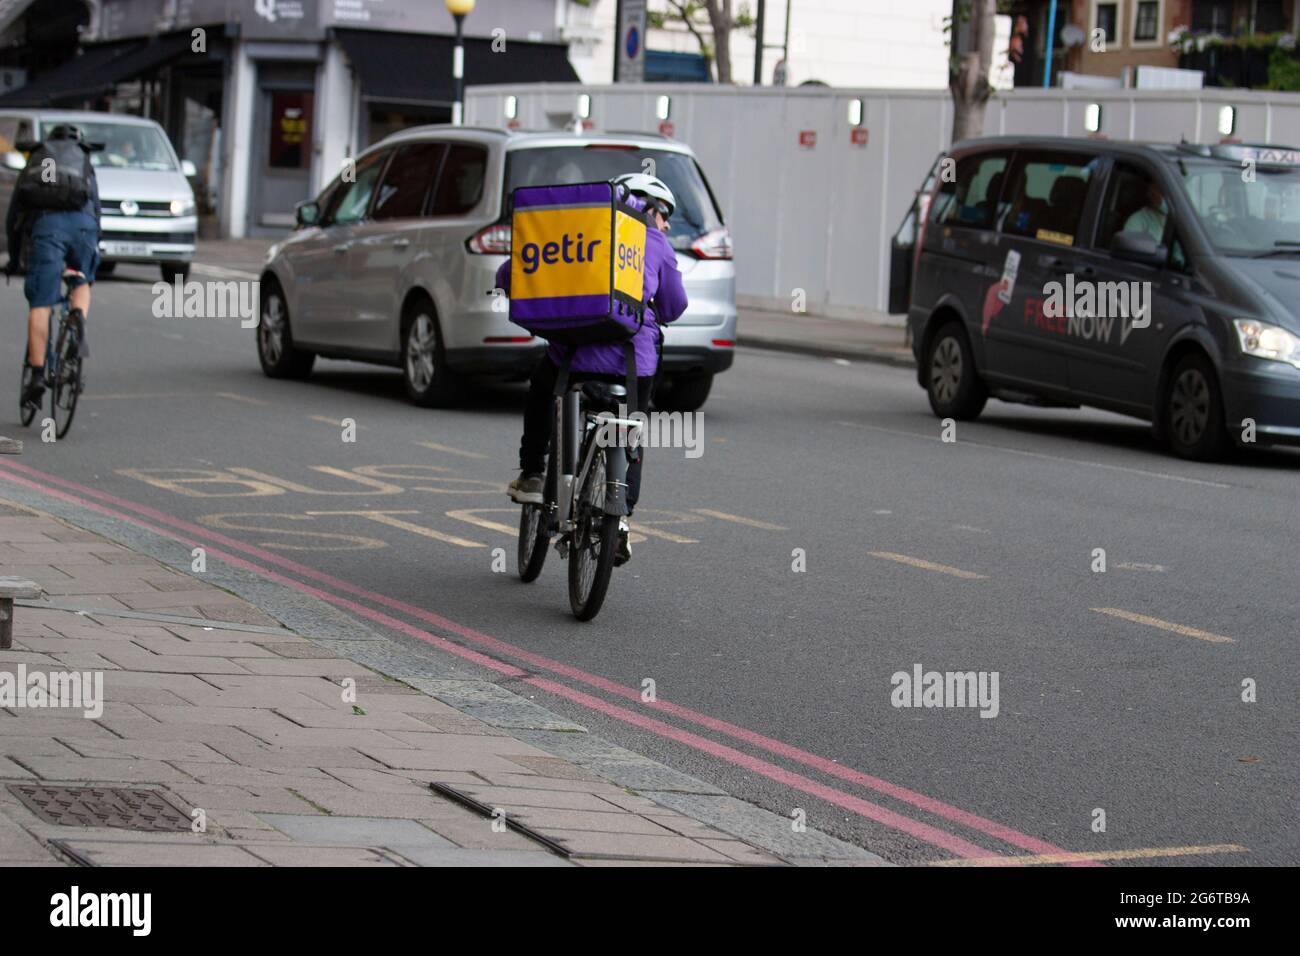 Electric bike rider of app based Getir start-up grocery delivery company, in London Stock Photo